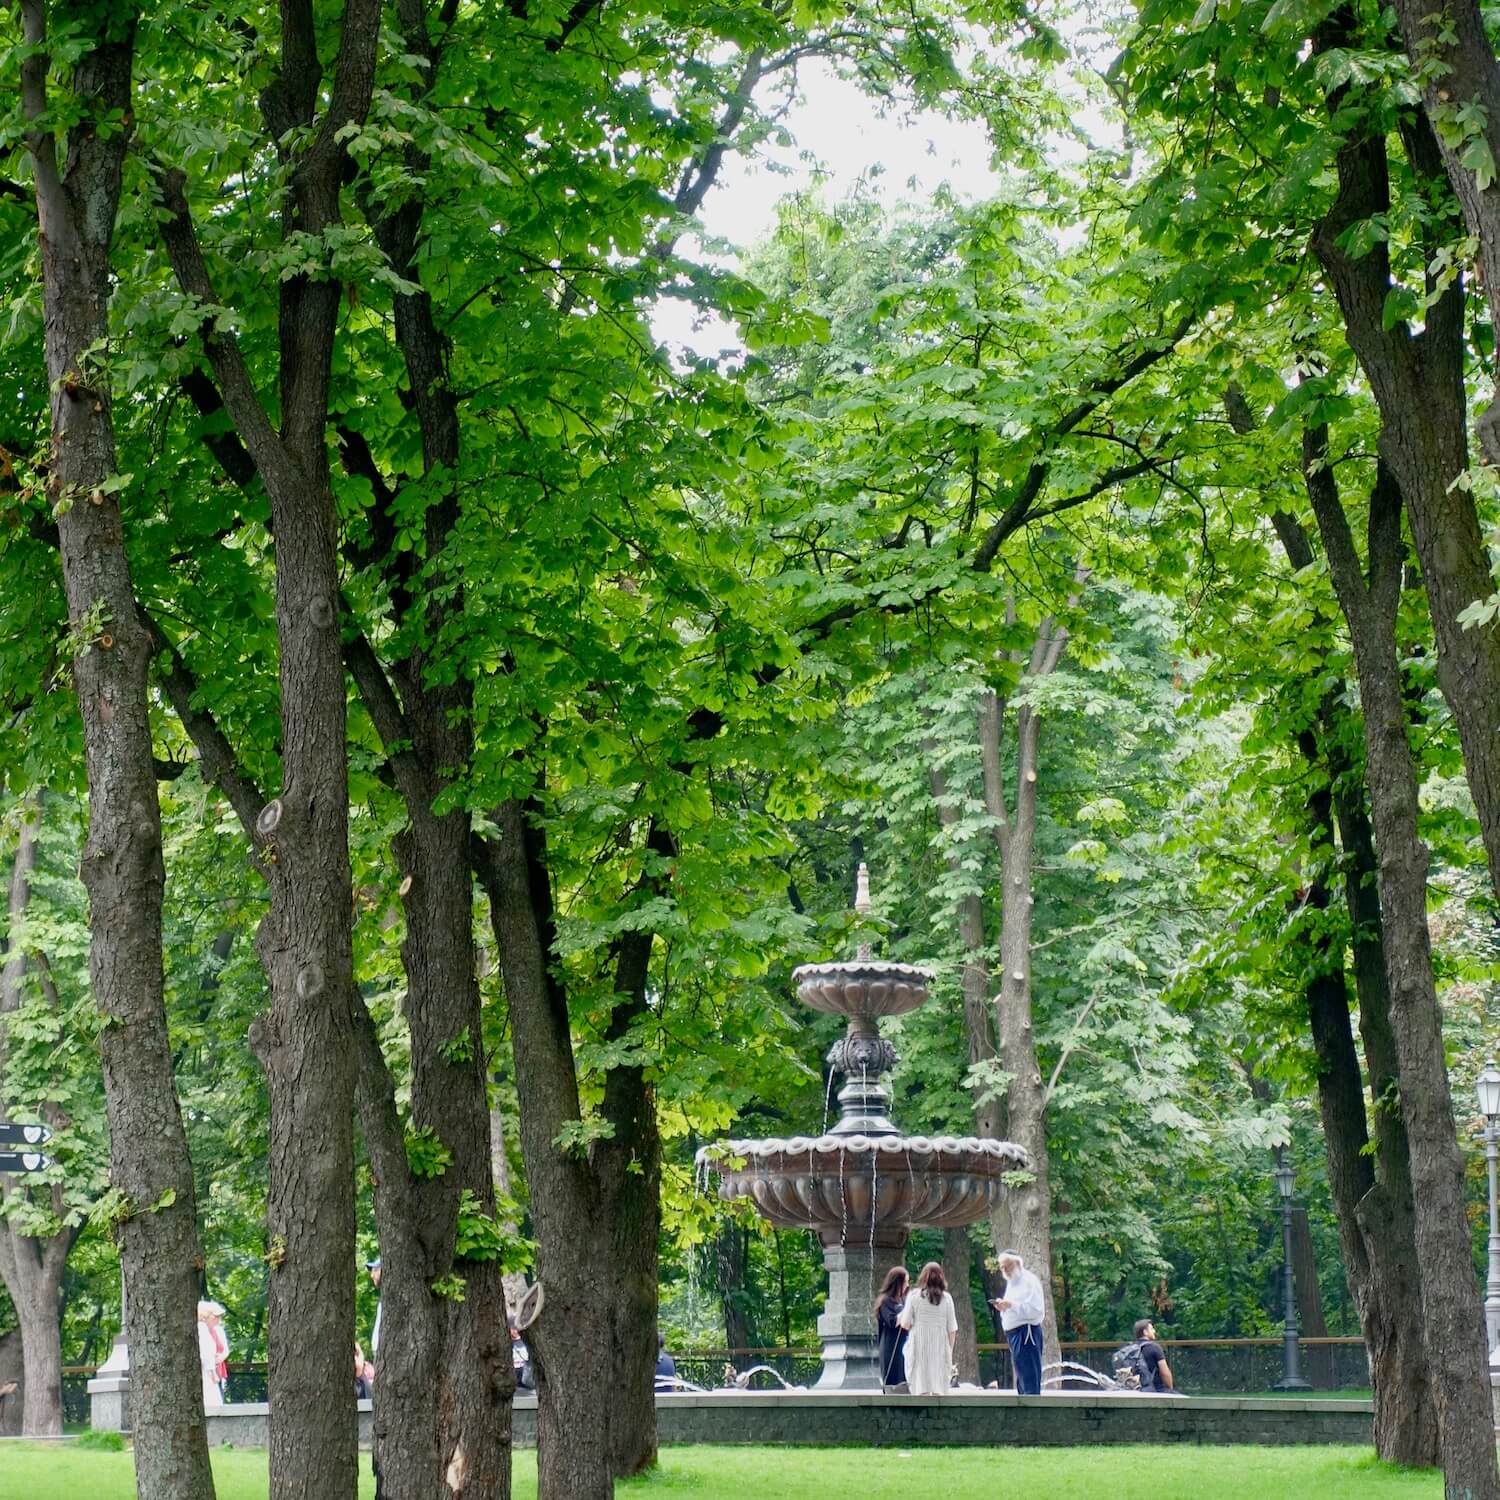 Volodymyr Hill has an abundance of trees and this classic style fountain sits in the middle of all the greenery.  The many parks of Ukraine's capitol city provide great ways to experience Kiev in one day.   